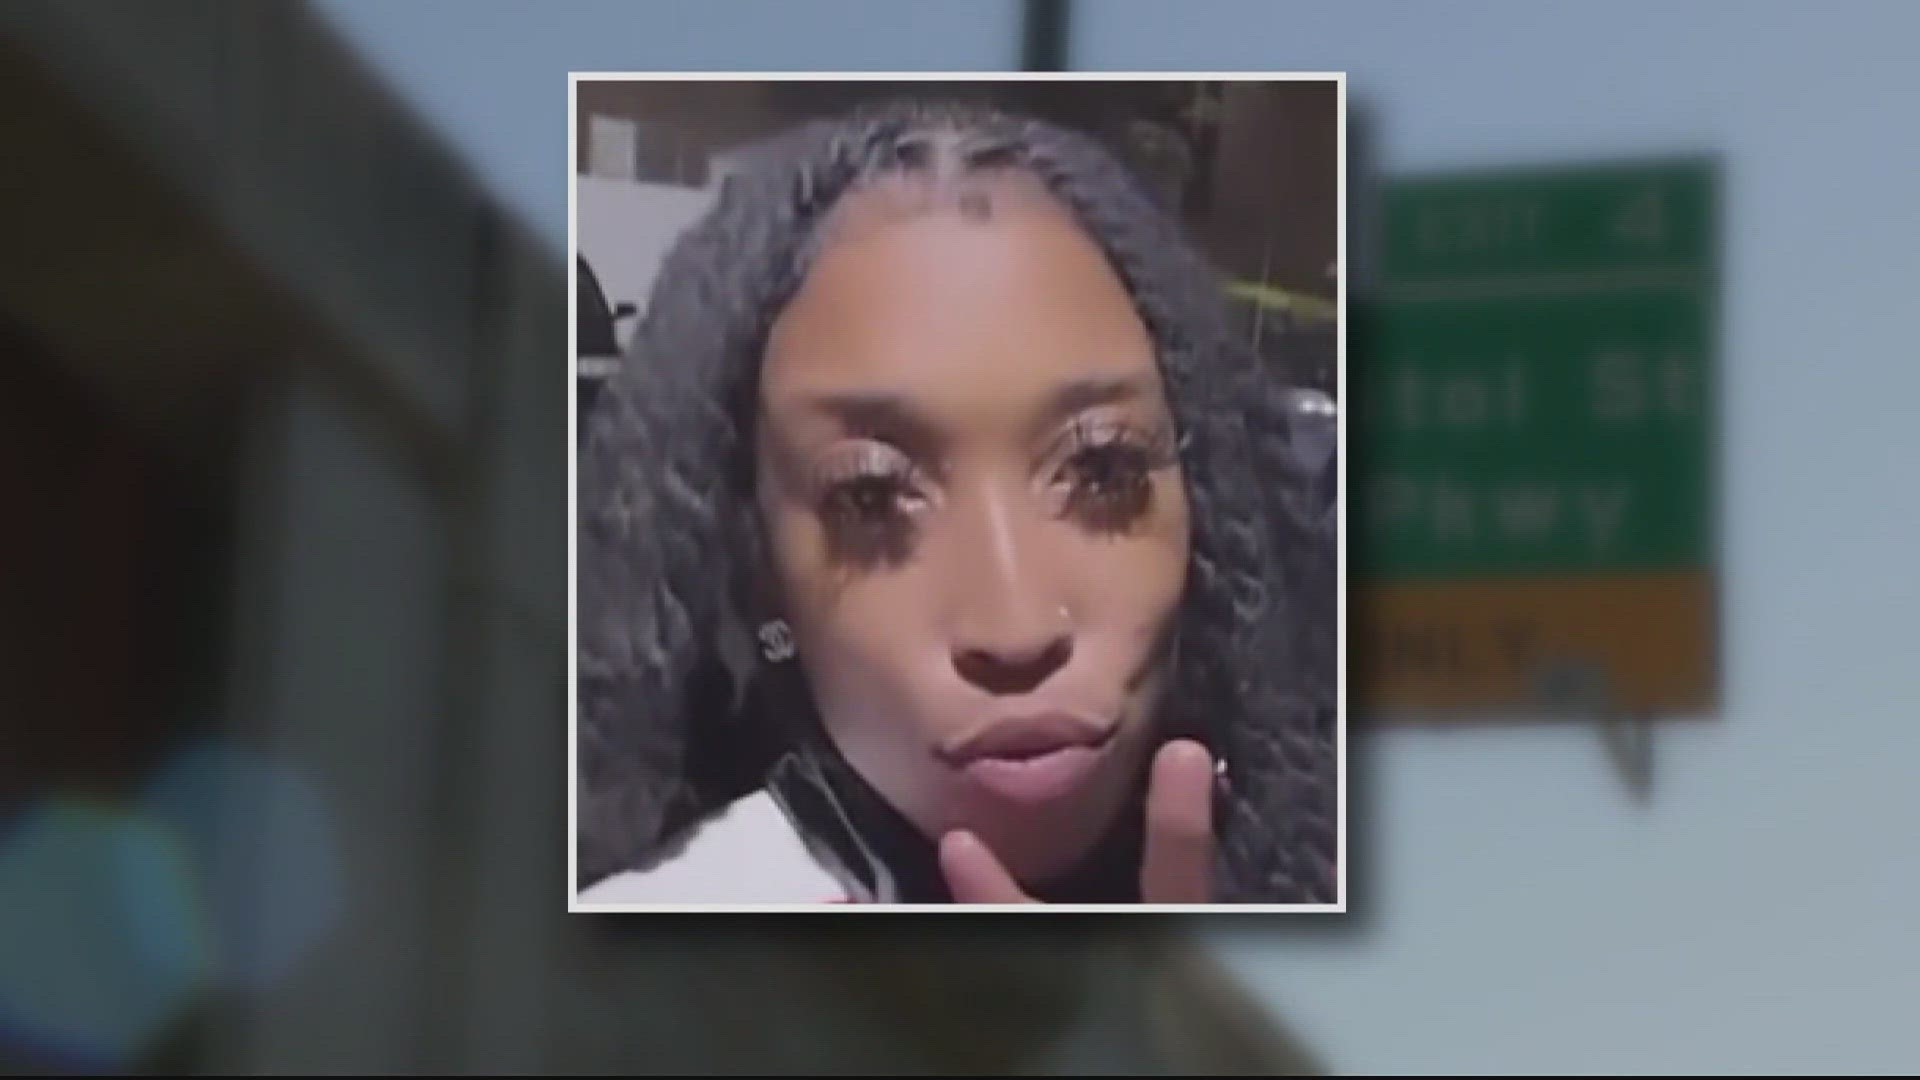 Loved ones are concerned about 25-year-old Chyna Crawford. She's been missing since Monday, October 23rd. Crawford was last seen along 'Good Hope Road' in Southeast.